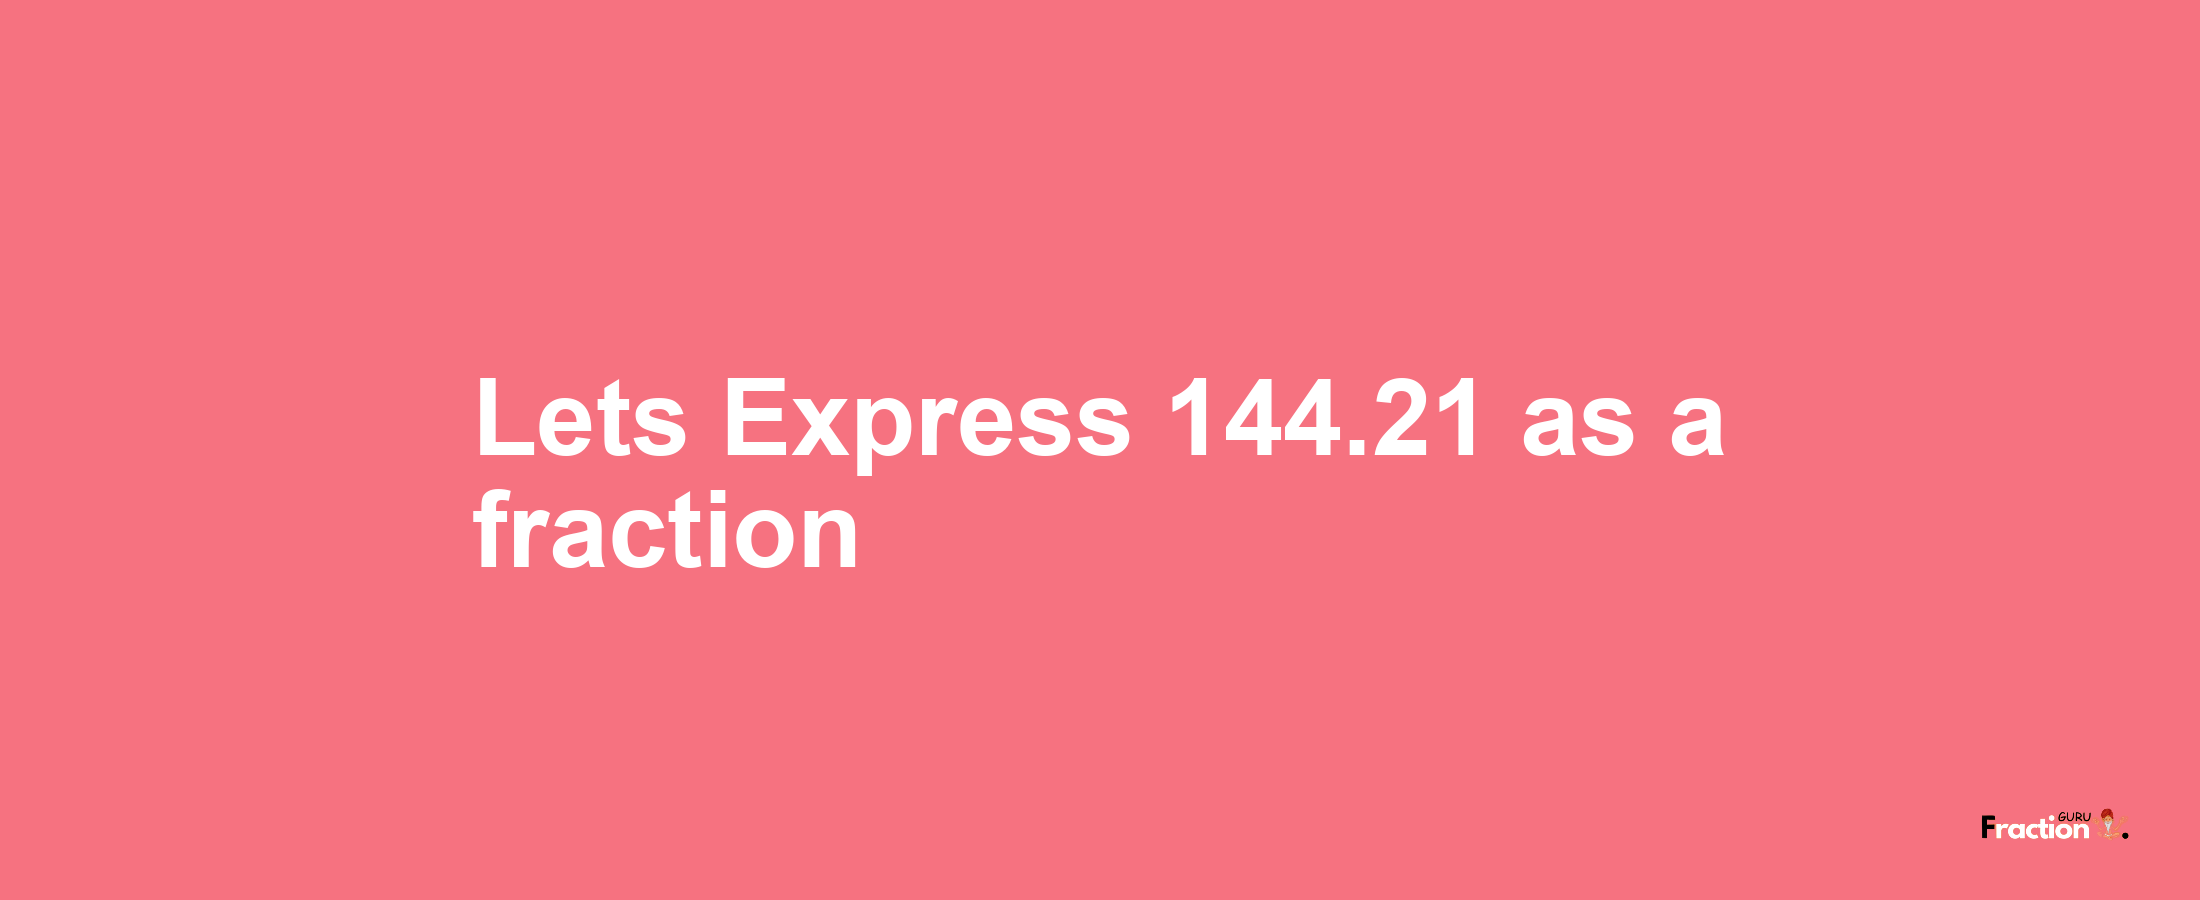 Lets Express 144.21 as afraction